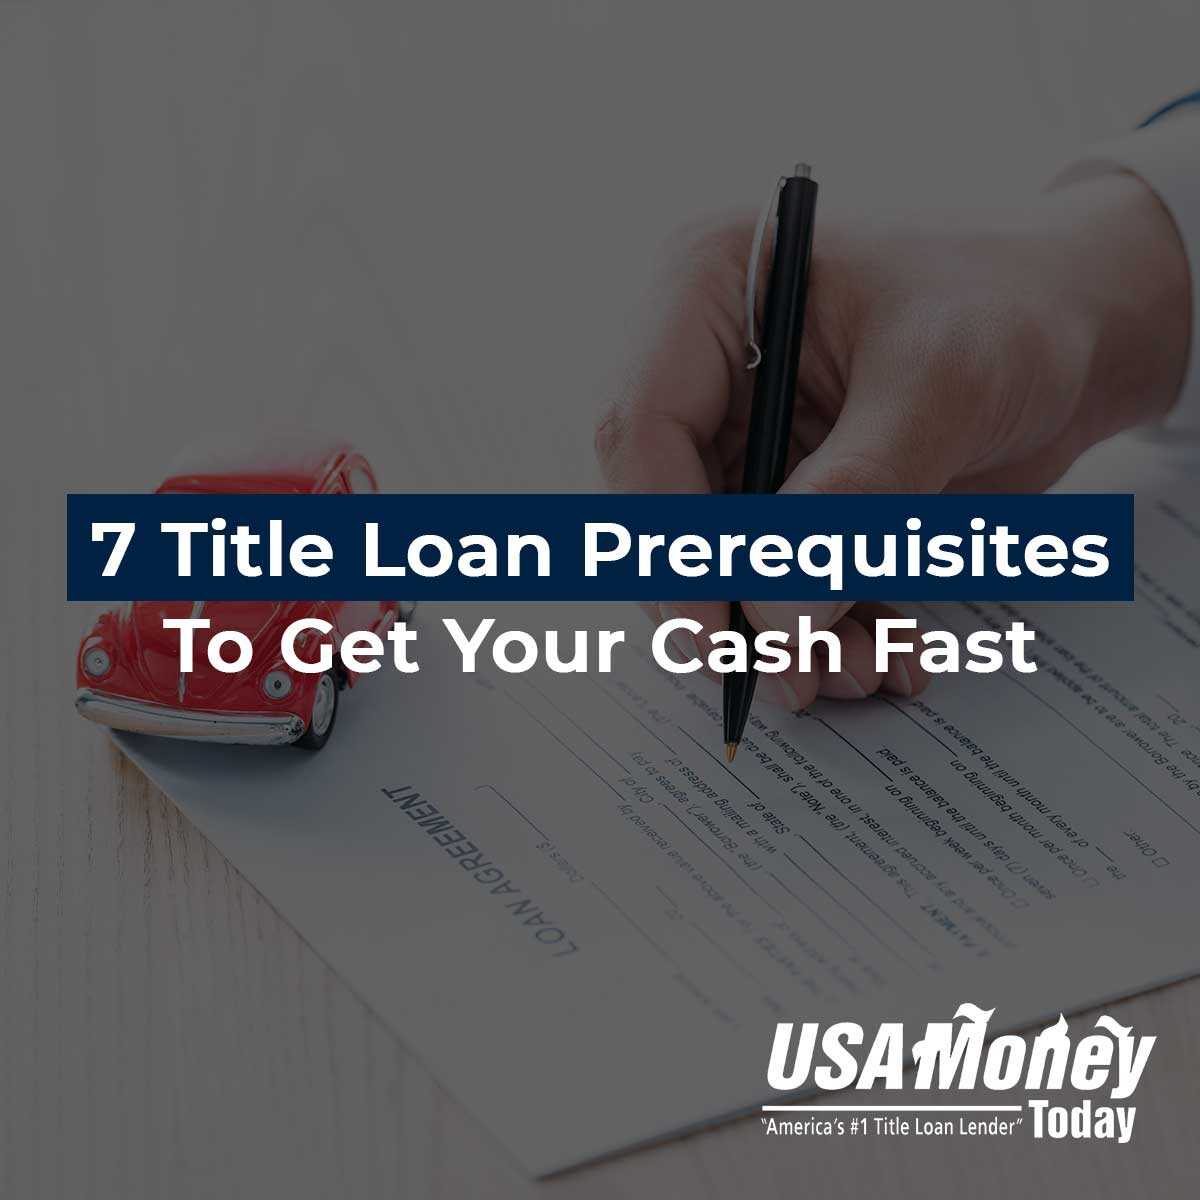 7 Title Loan Prerequisites To Get Your Cash Fast